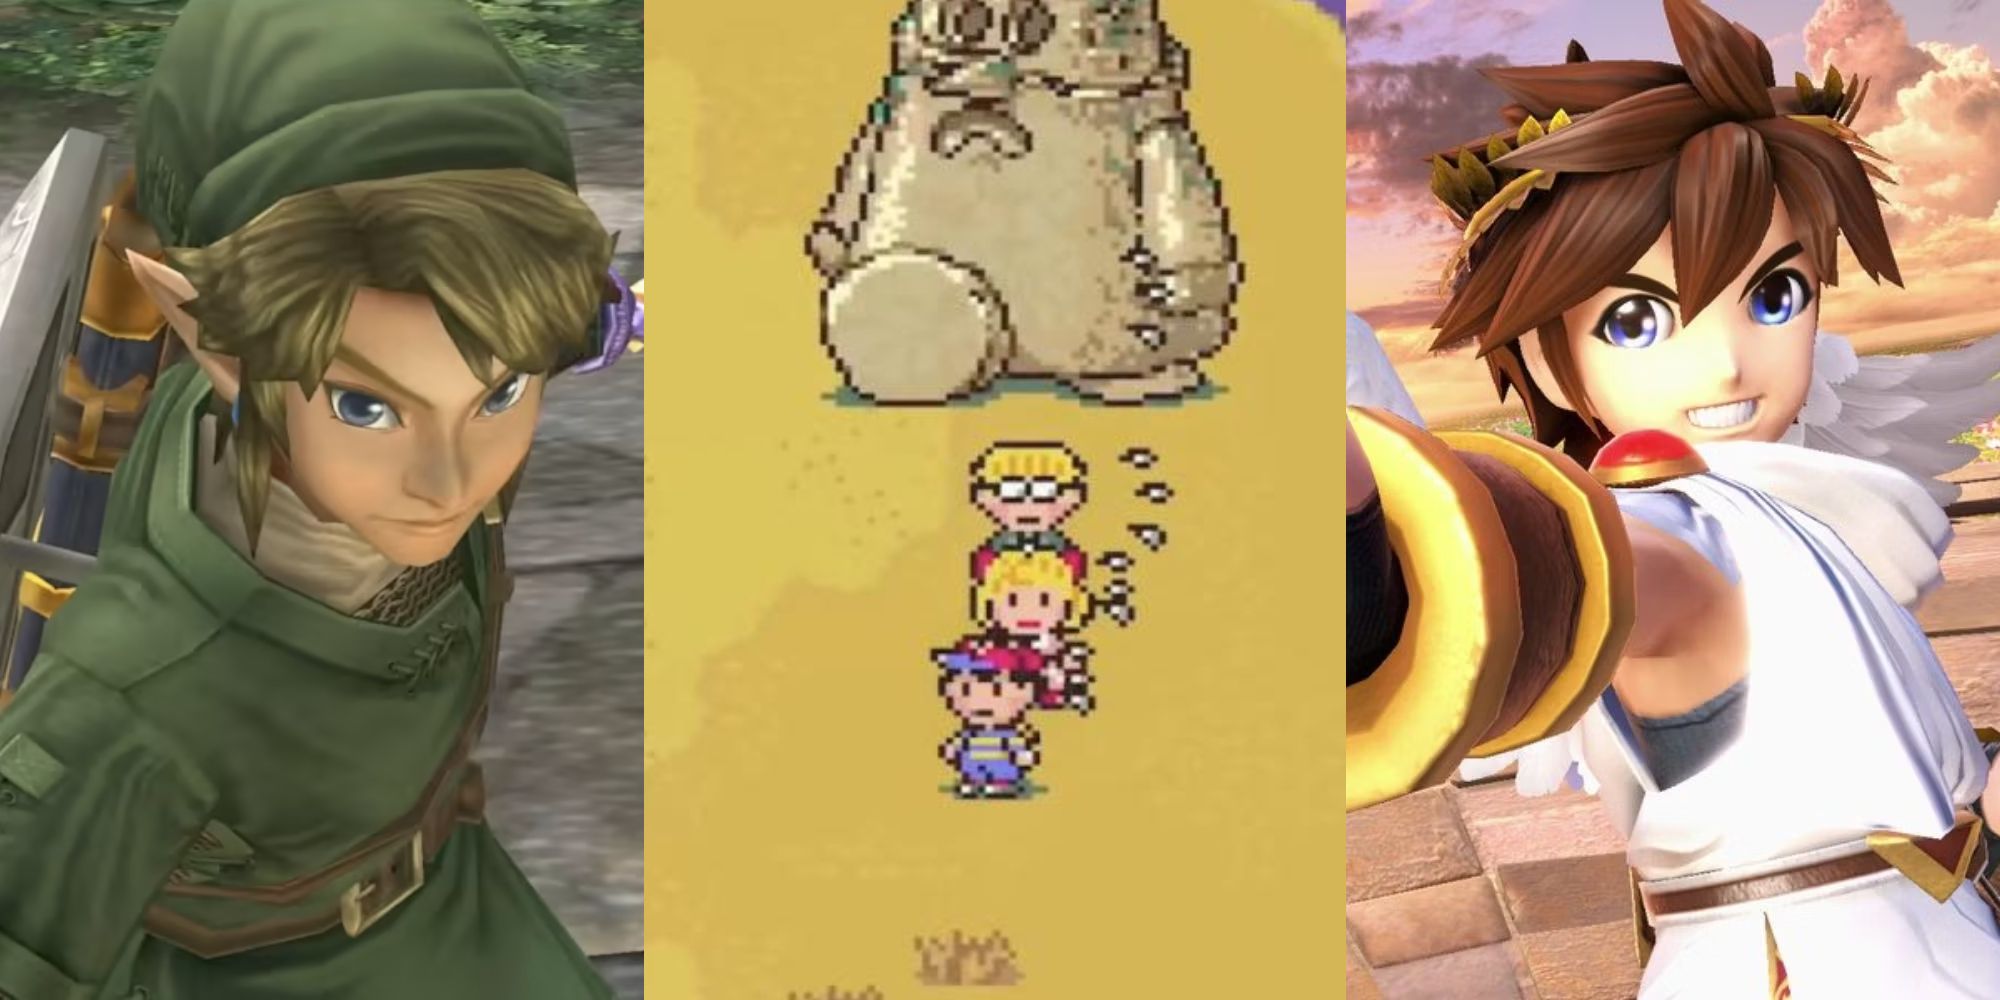 Split image: Link from Twilight Princess, multi-character screenshot from Earthbound, and Icarus from Icarus: Uprising